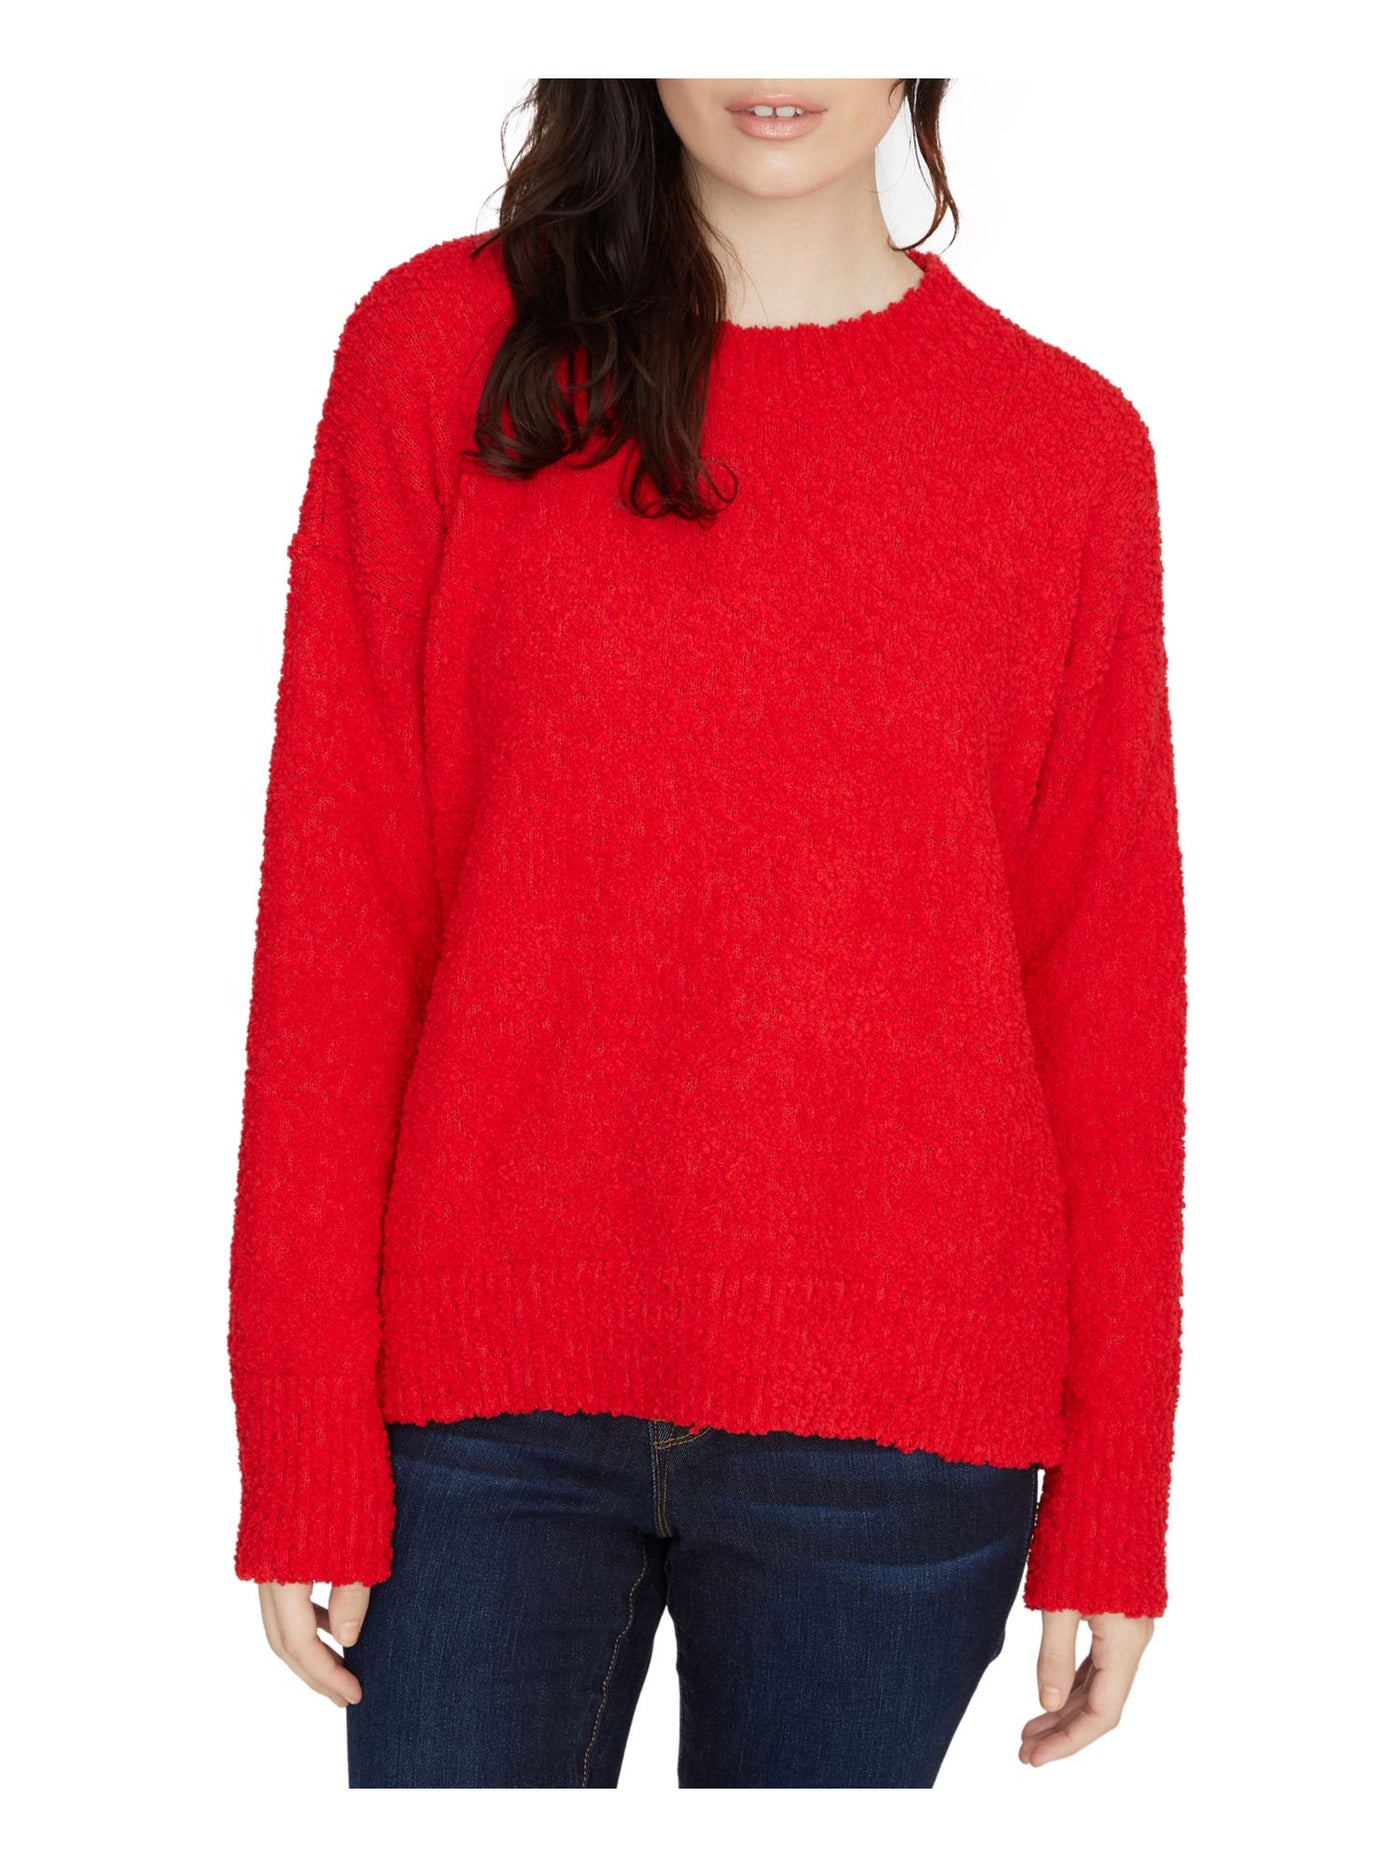 SANCTUARY Womens Red Textured High-low Hem Long Sleeve Crew Neck Wear To Work Hi-Lo Sweater L